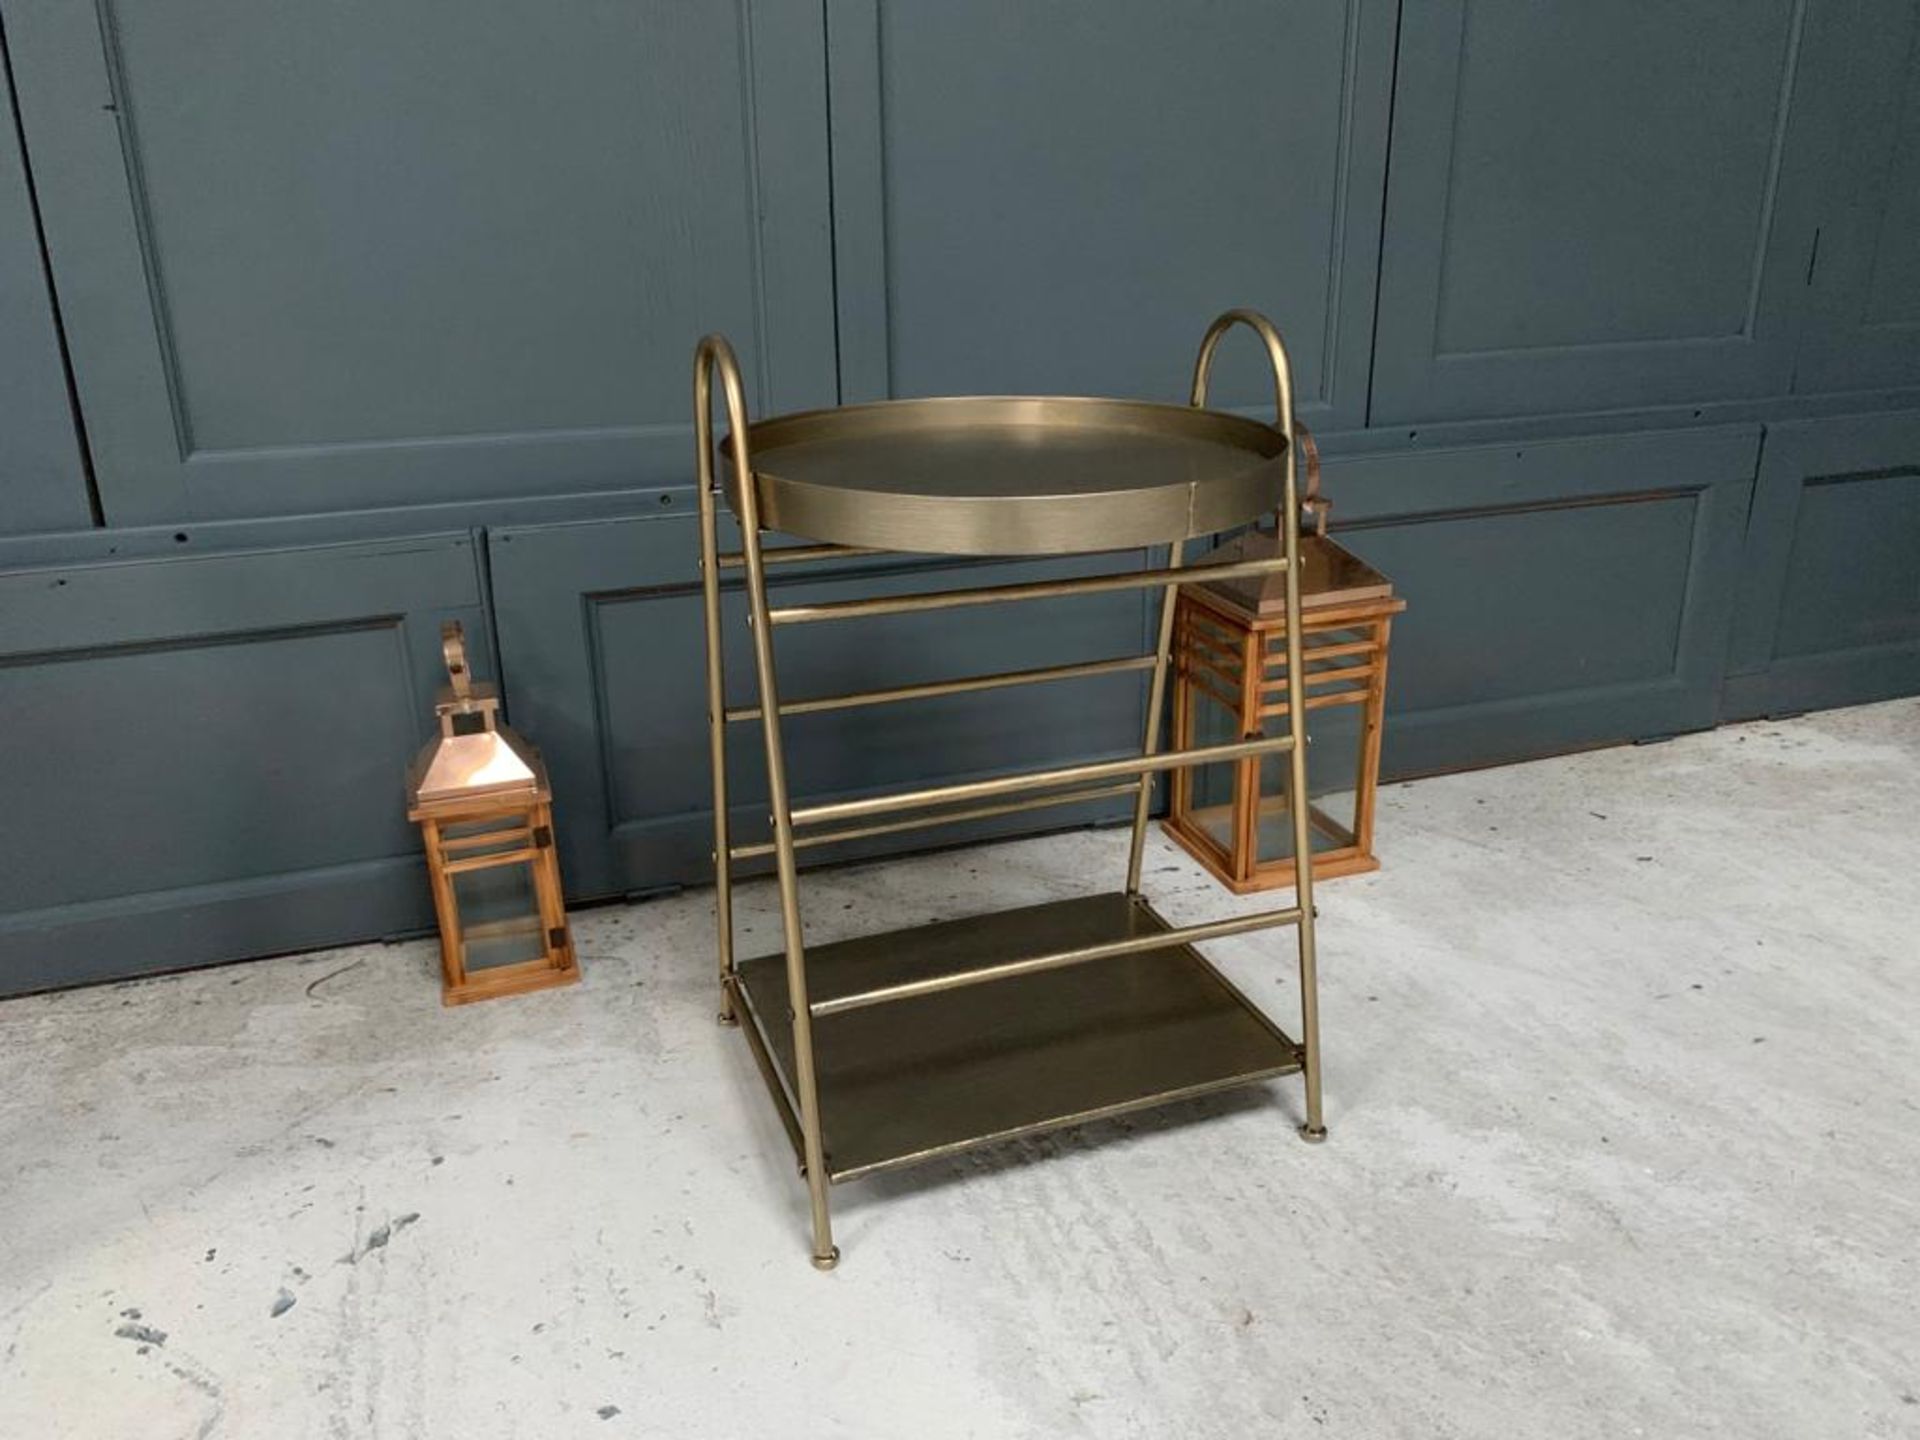 New Boxed Large Drinks Tray And Side Table In A Brass Finish (Approx 70cm)